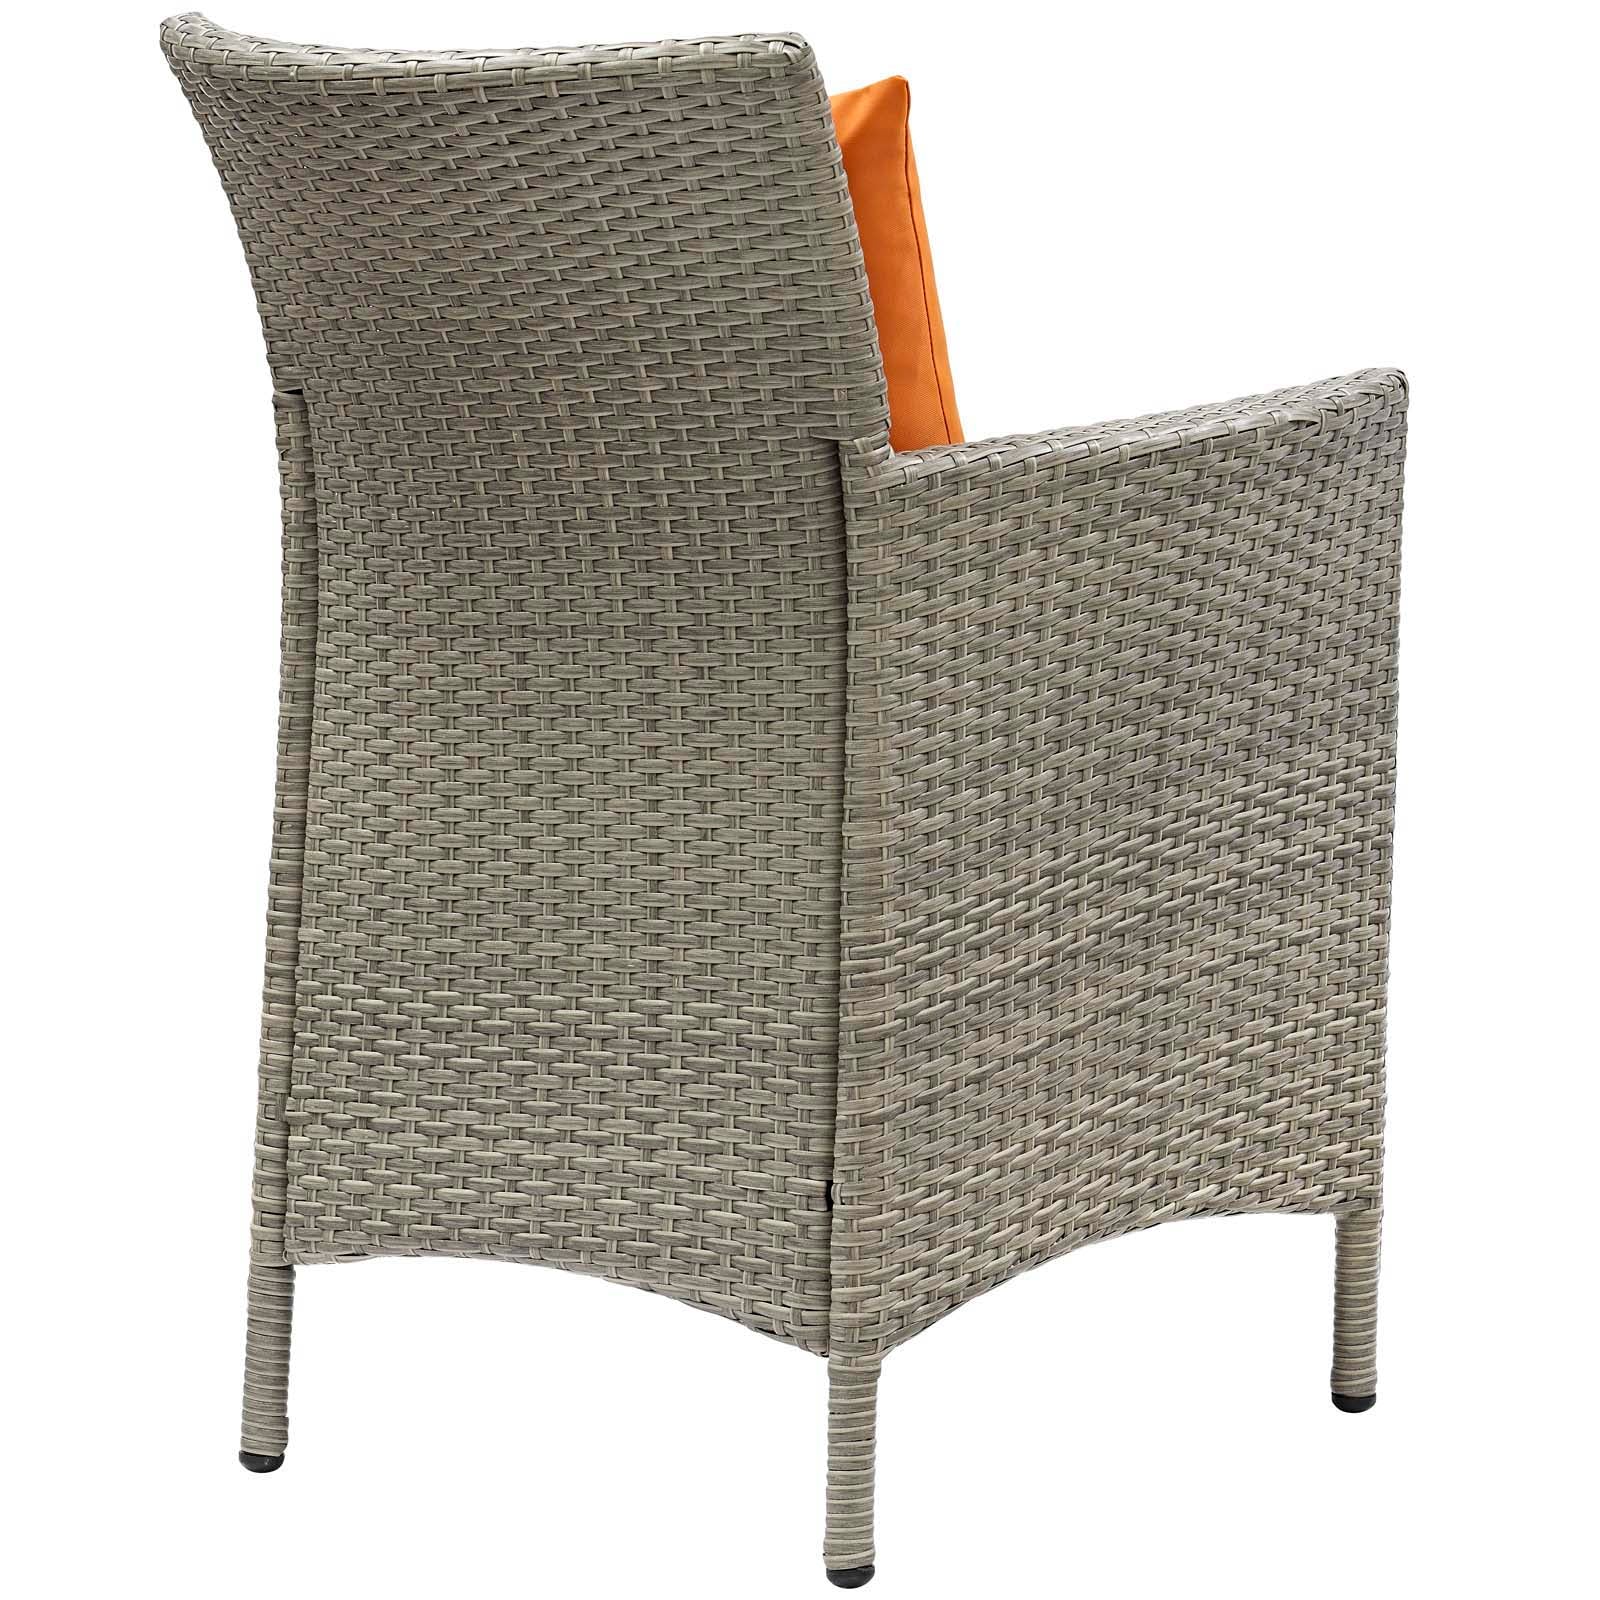 Modway Outdoor Dining Chairs - Conduit Outdoor Patio Wicker Rattan Dining Armchair Set of 2 Light Gray Orange